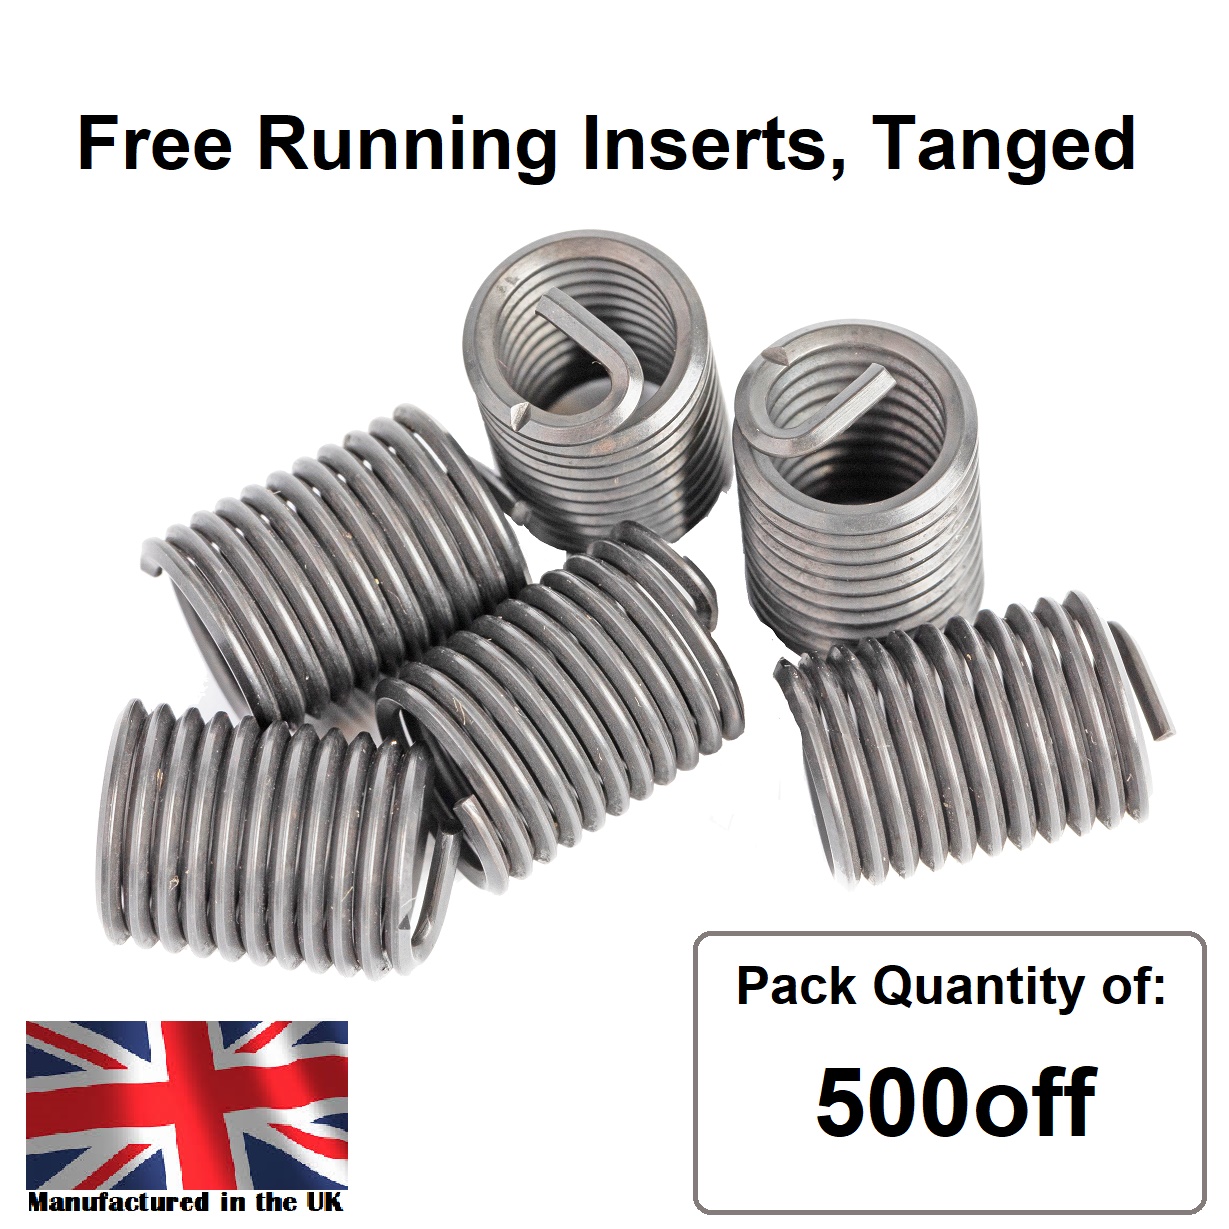 M2 x 0.4 x 1D Metric Coarse, Free Running, Tanged, Wire Thread Repair Insert, 304/A2 Stainless (Pack 500)